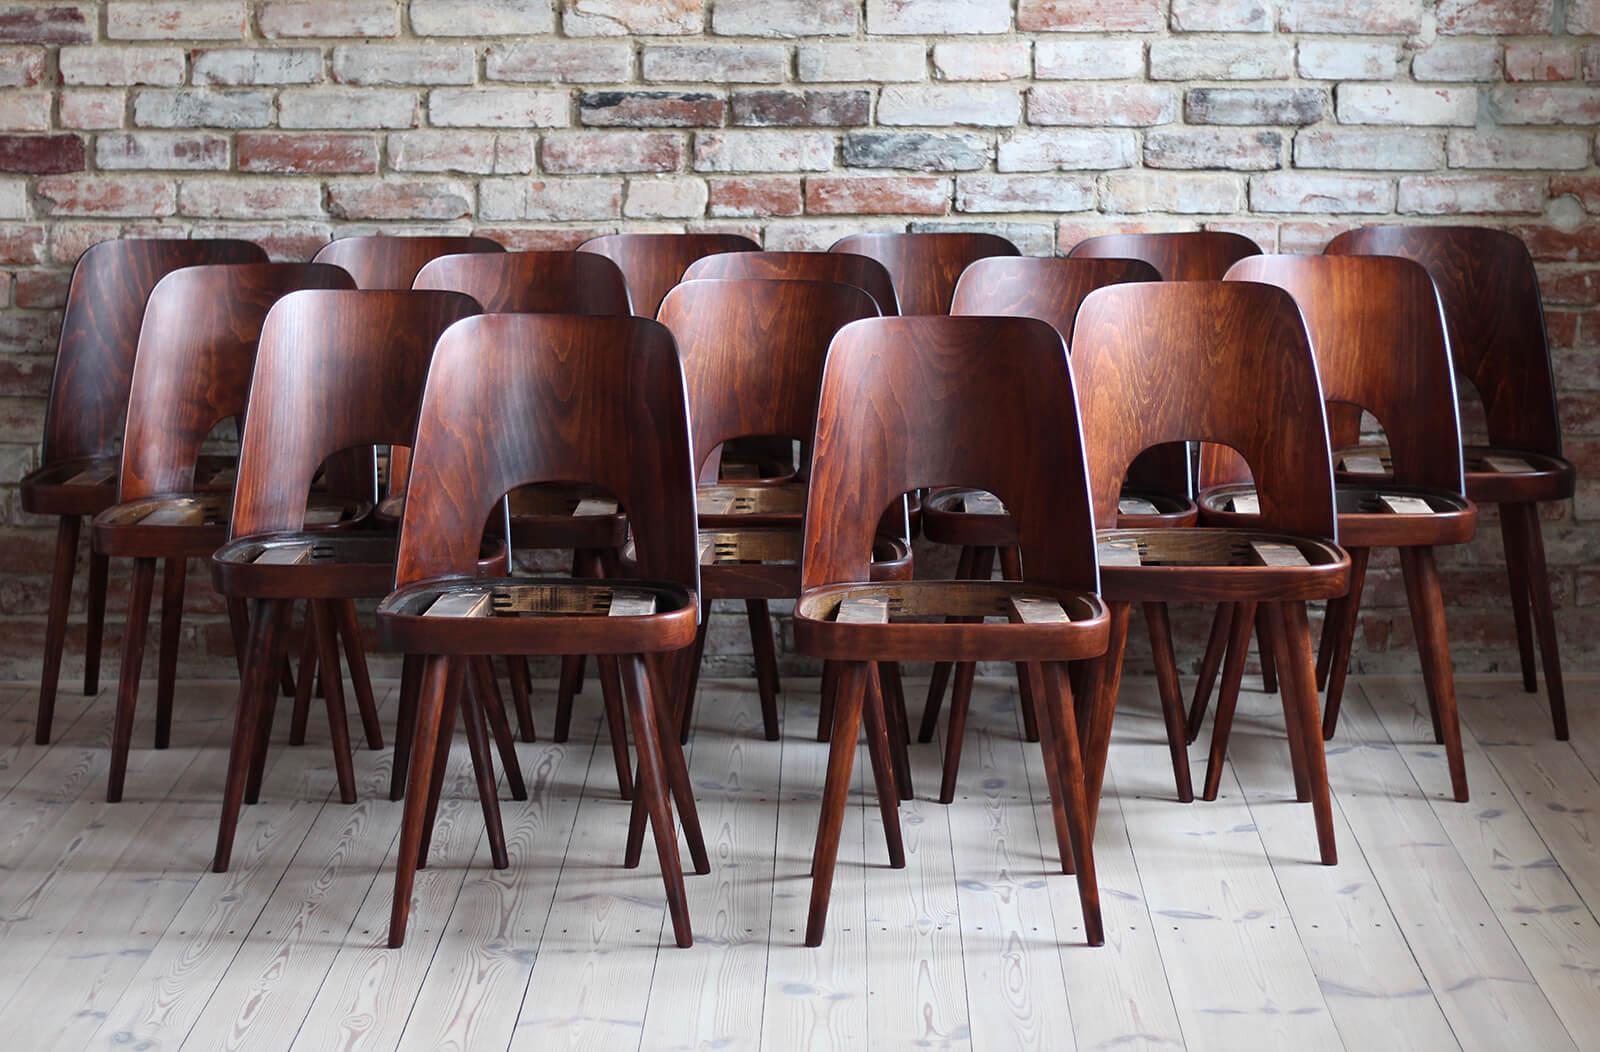 This set of 16 vintage dining chairs was designed by Oswald Haerdtl in the 1950s, famous Austrian designer - together with Mr. Josef Hoffmann he designed the cafe terrace at the Vienna Werkbund Exhibition of 1930, where they designed every little